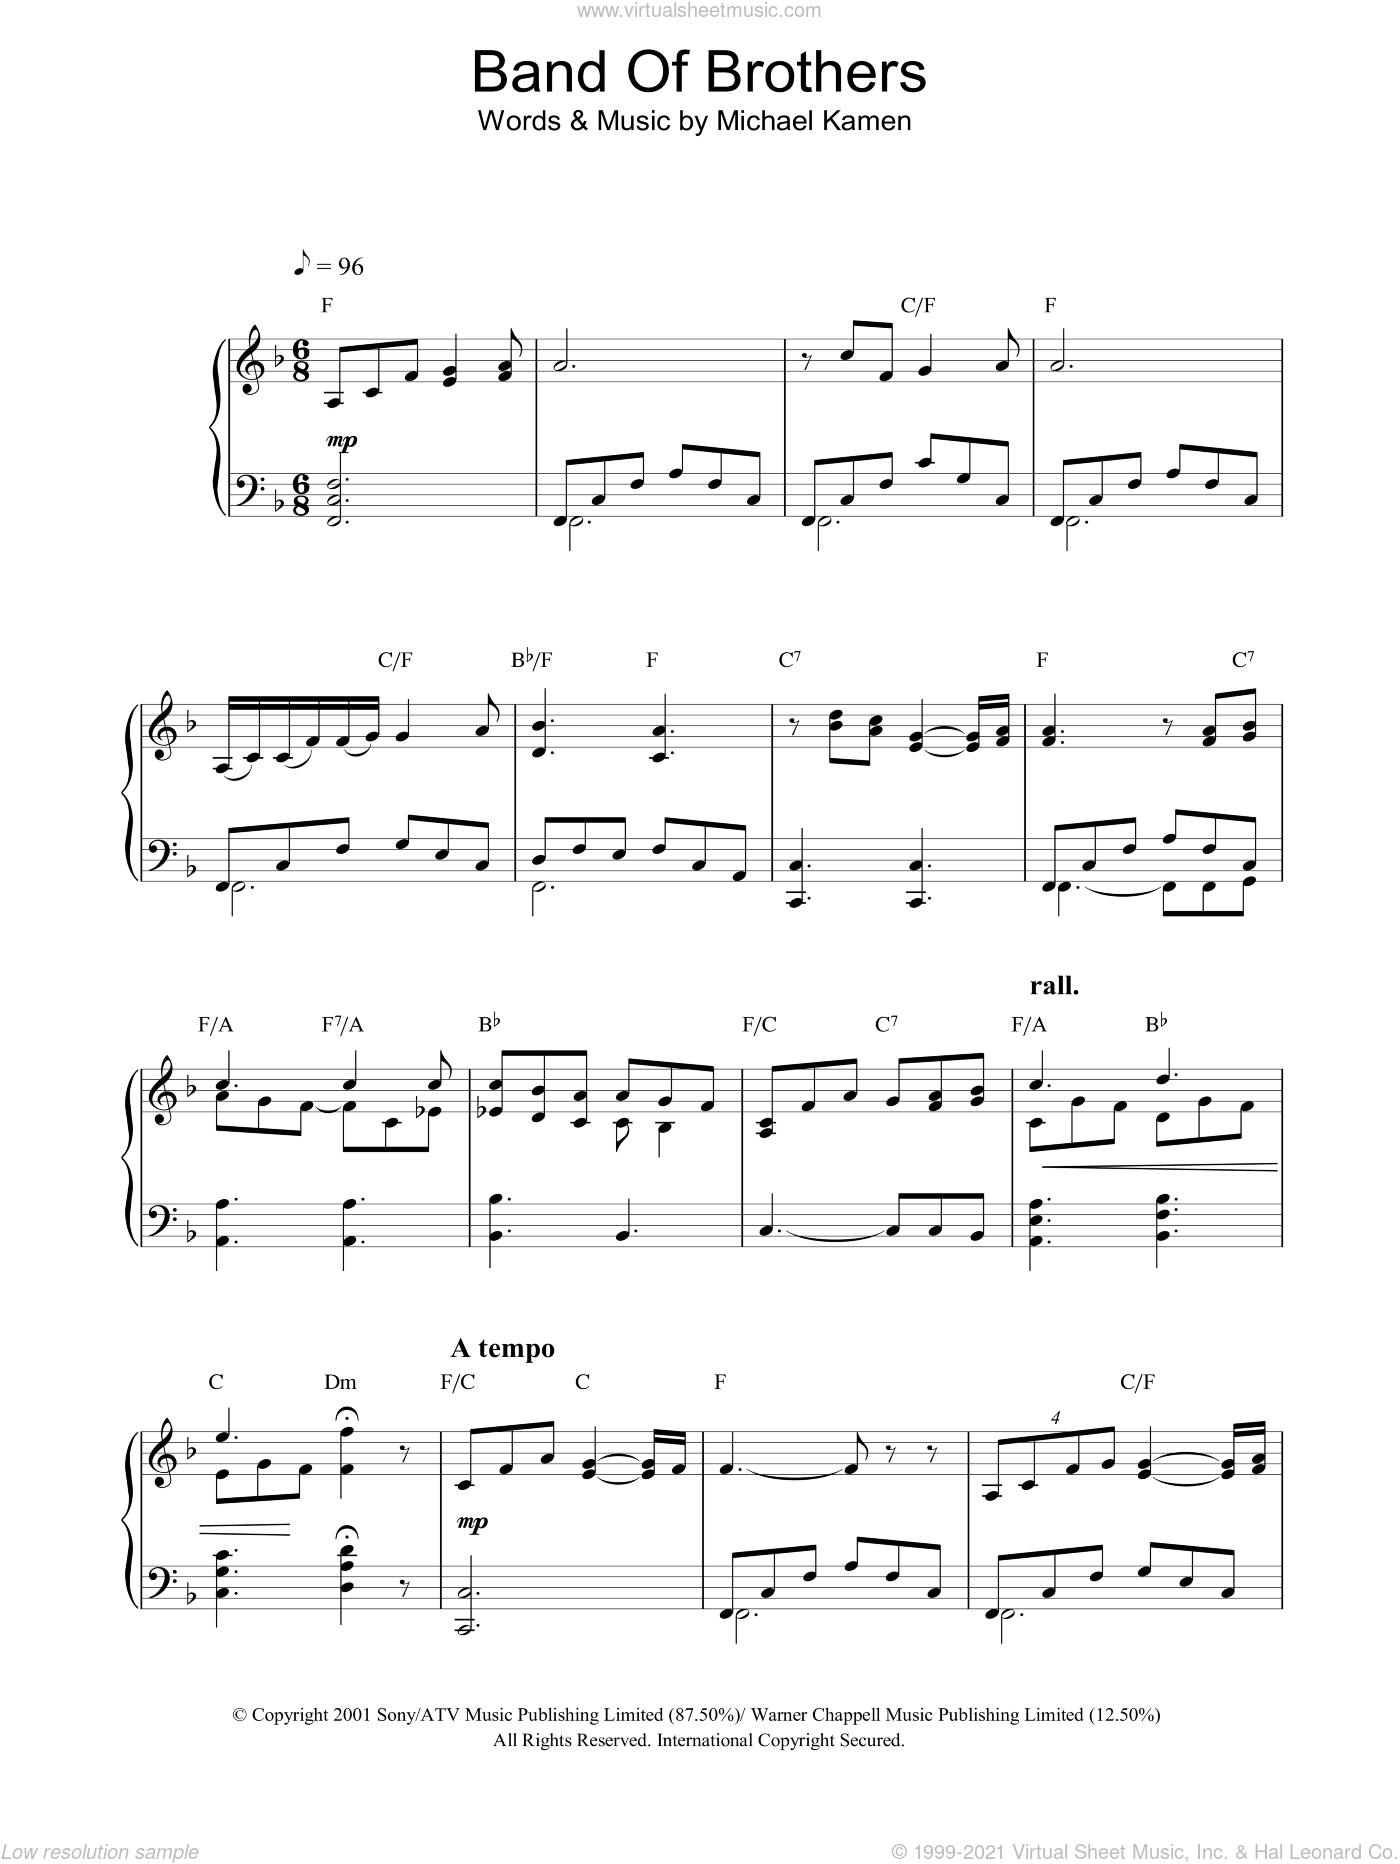 Kamen - Band Of Brothers sheet music for piano solo [PDF]